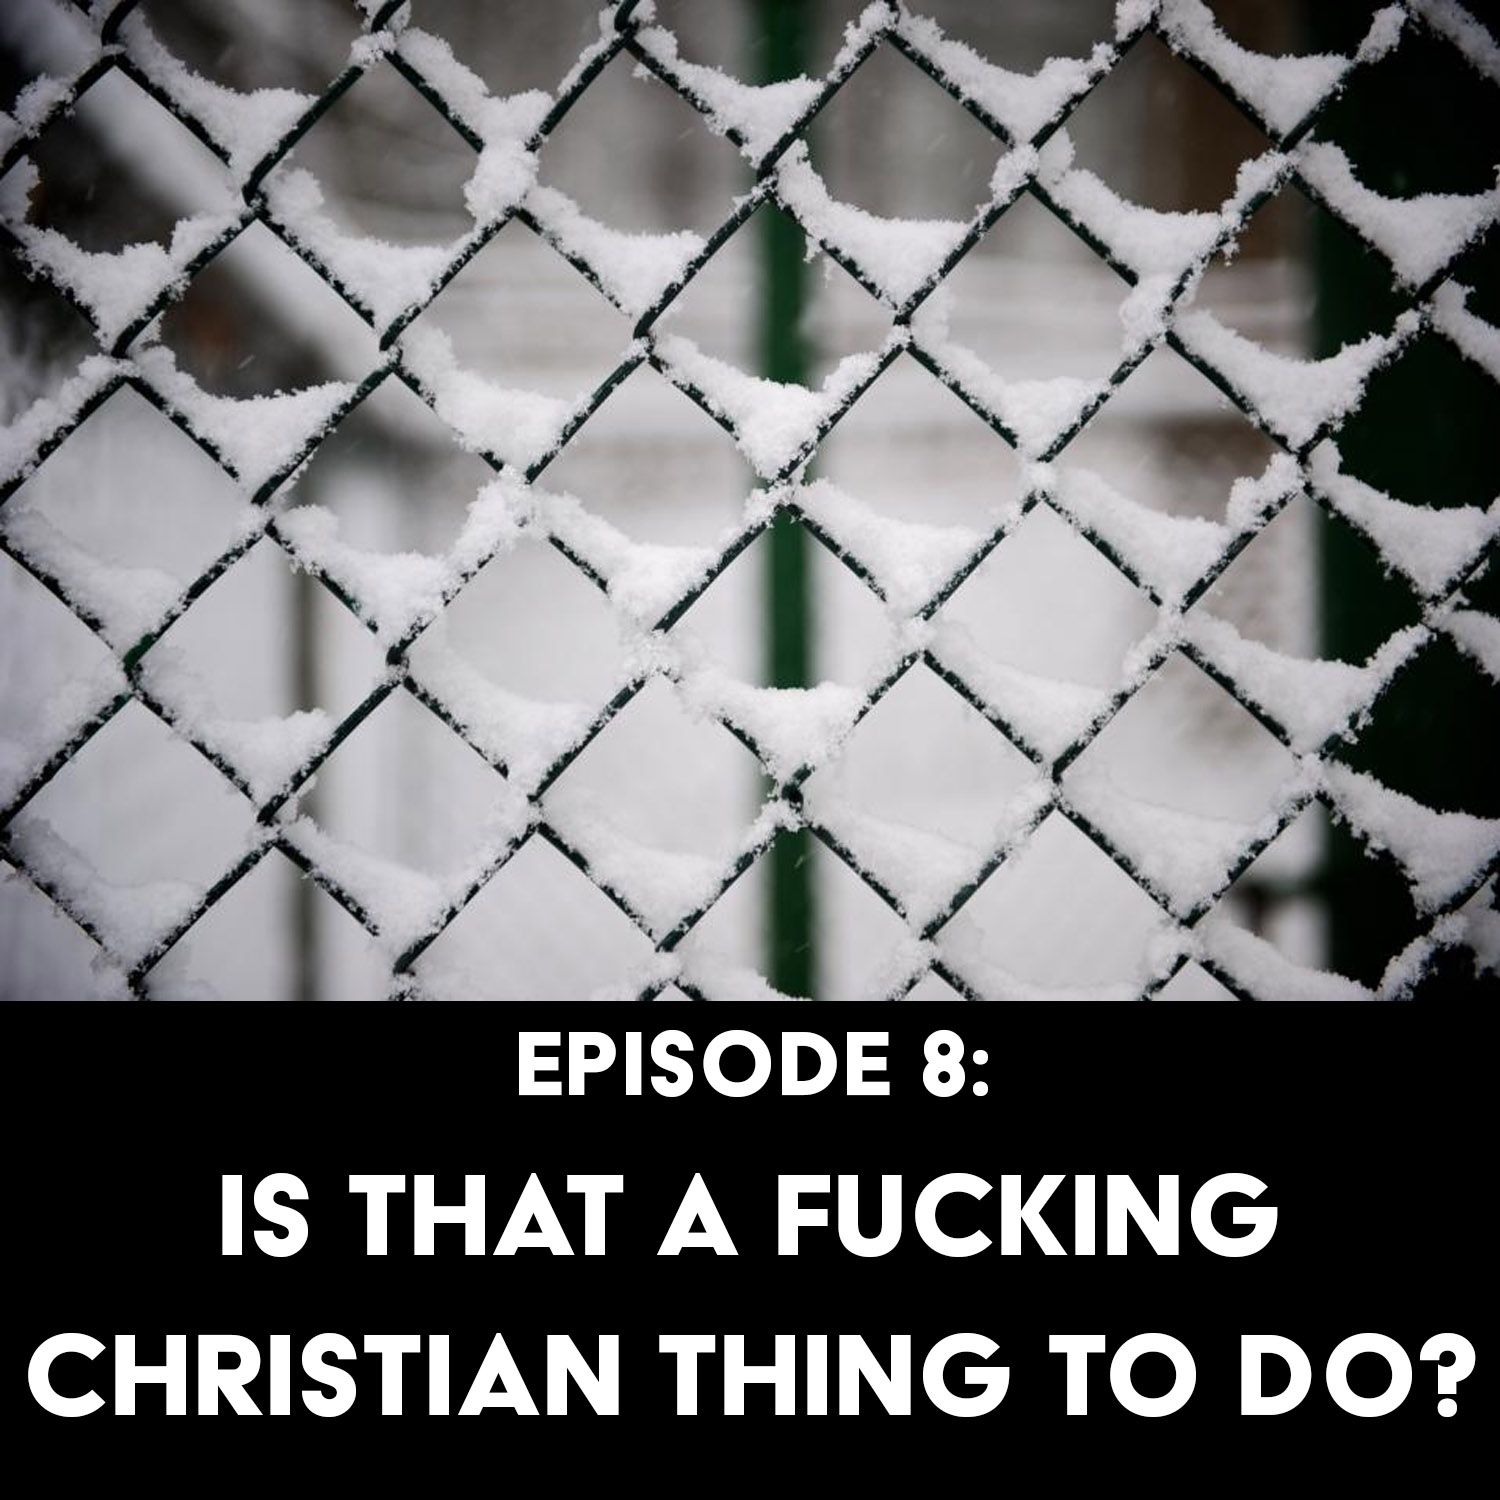 Episode 8: Is That a Fucking Christian Thing to Do?